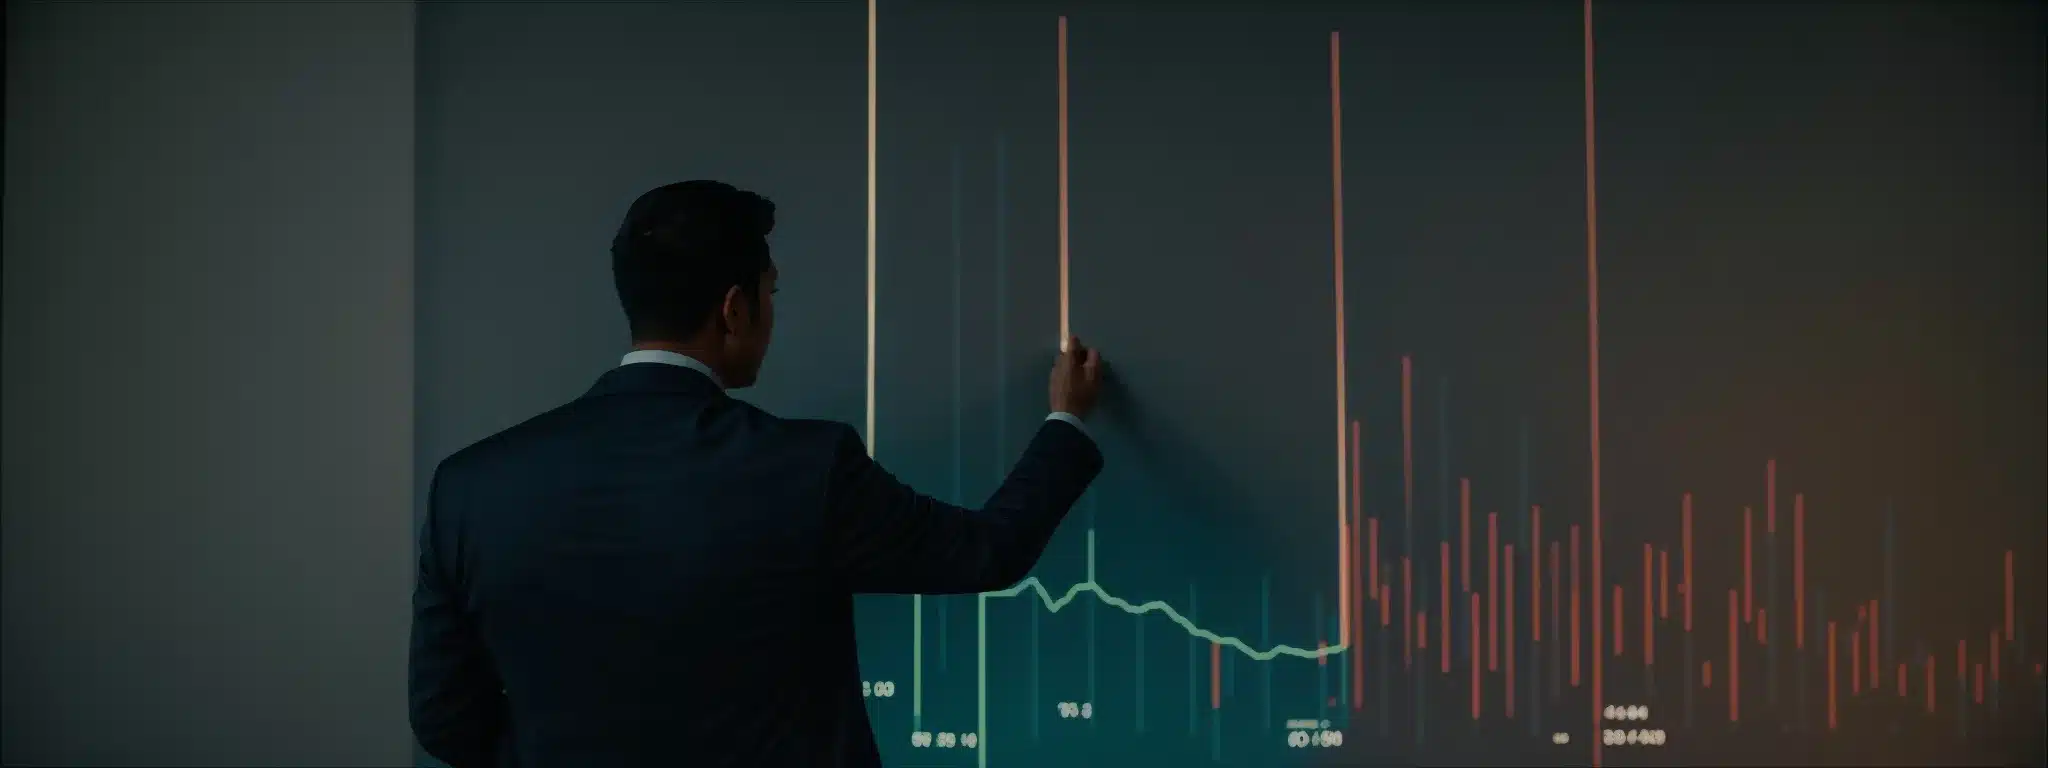 A Marketer Stands Before A Large Growth Chart, Analyzing Trends And Metrics Illuminated On The Screen.